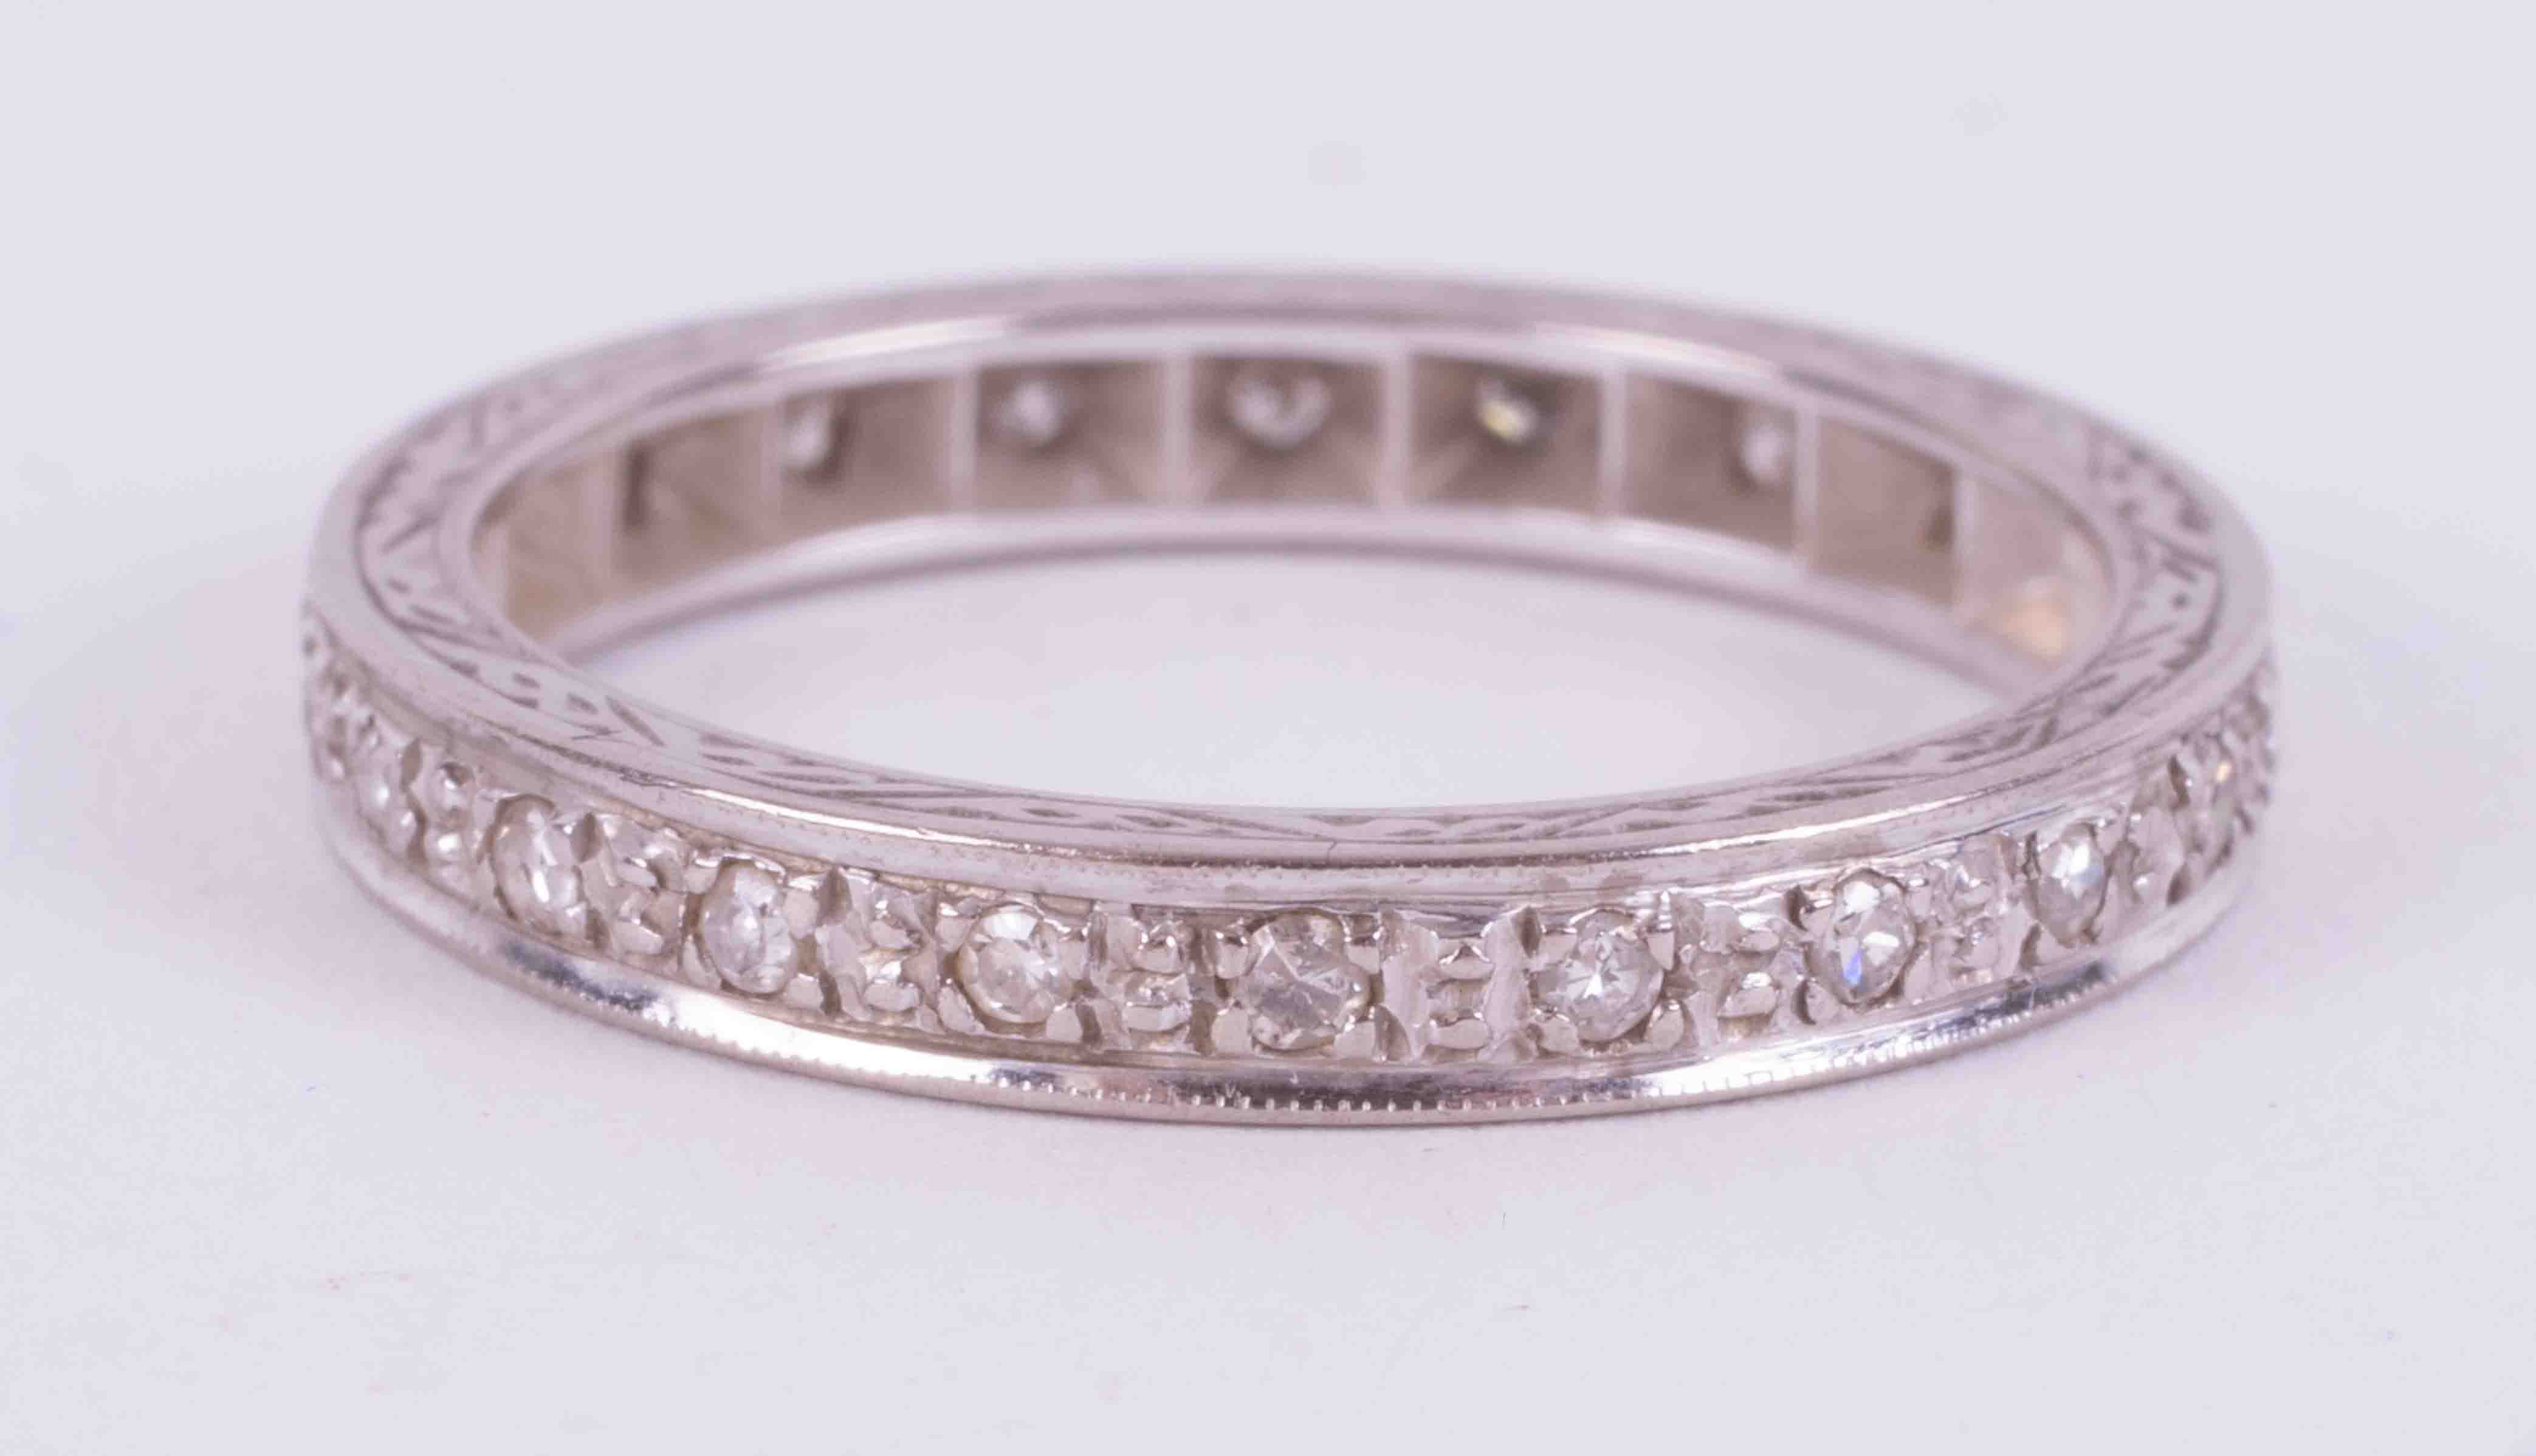 An 18ct white gold full eternity ring set with small old cut diamonds and engraving on the edges,